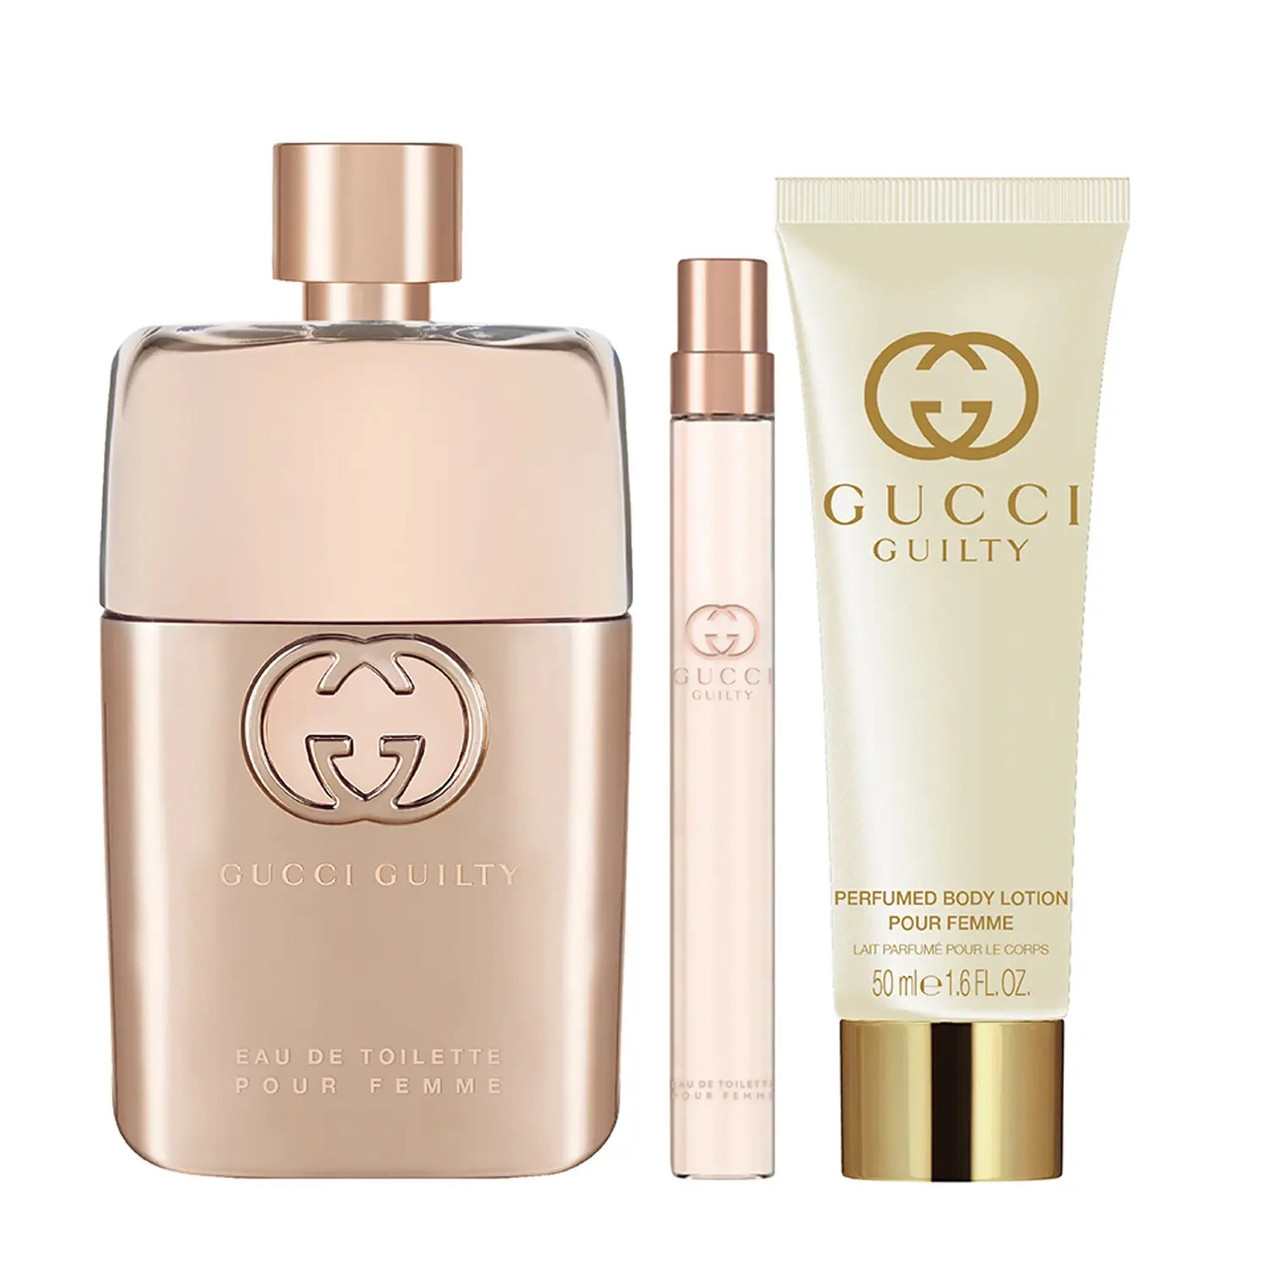 Gucci Guilty Pour Femme Eau De Parfum Intense Spray 90ml/3oz buy in United  States with free shipping CosmoStore